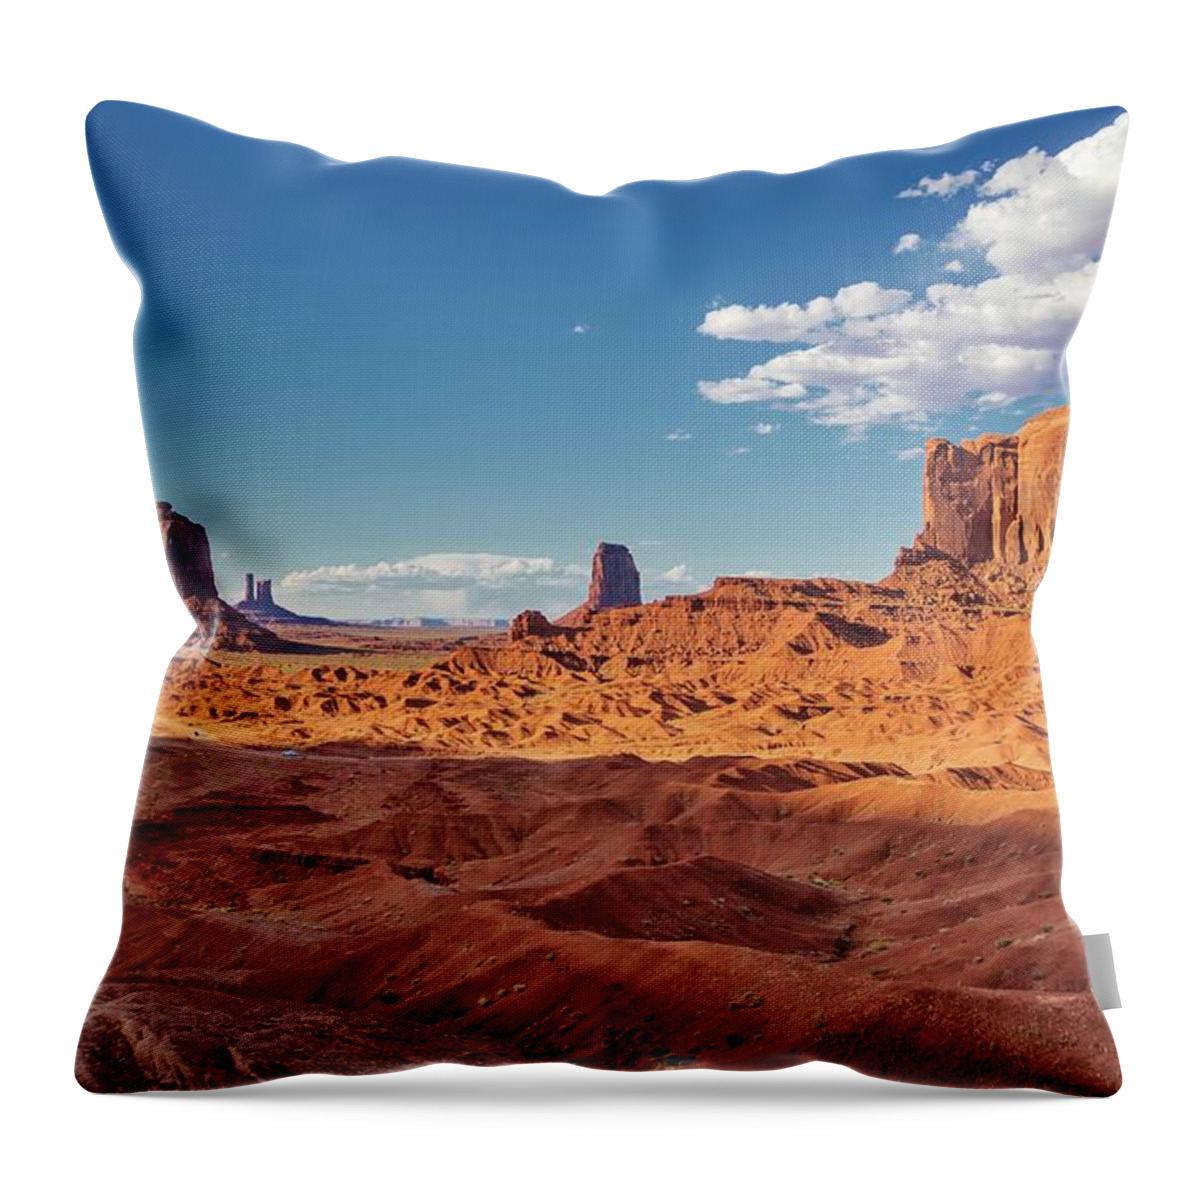 Monument Valley Throw Pillow featuring the photograph John Ford's Point Monument Valley by Marisa Geraghty Photography